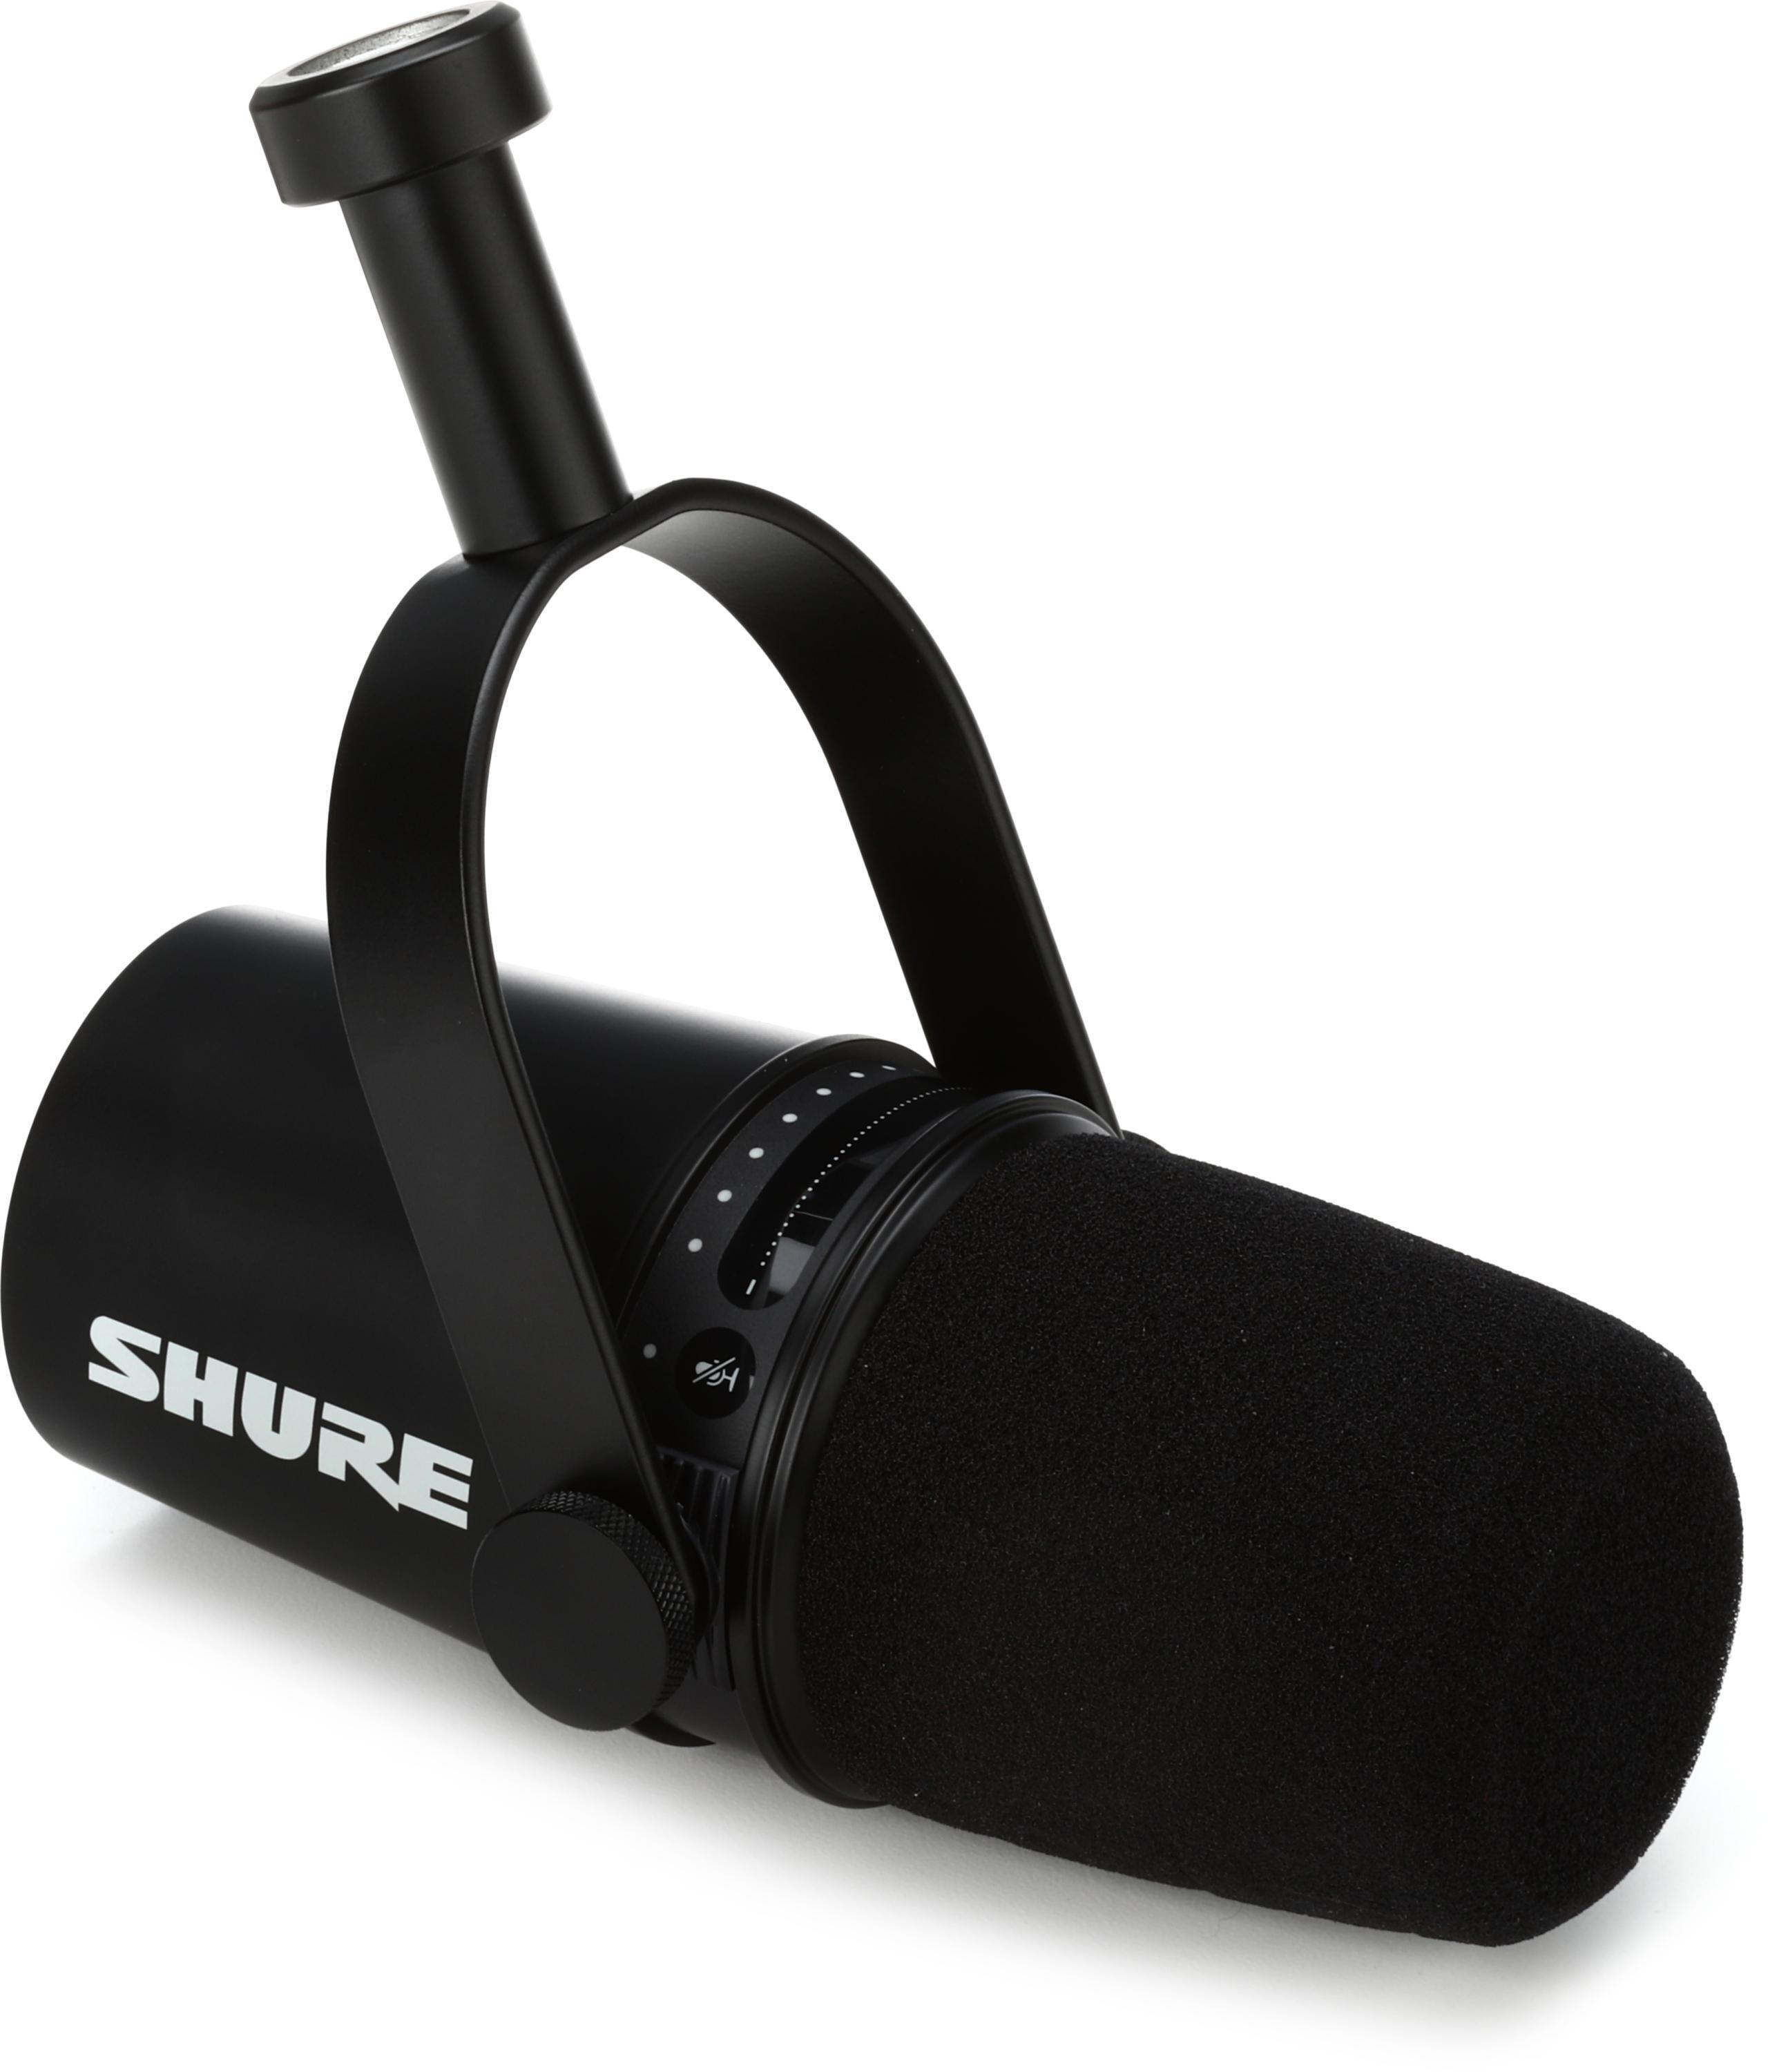 Shure MV7 USB Podcast Microphone - Black | Sweetwater